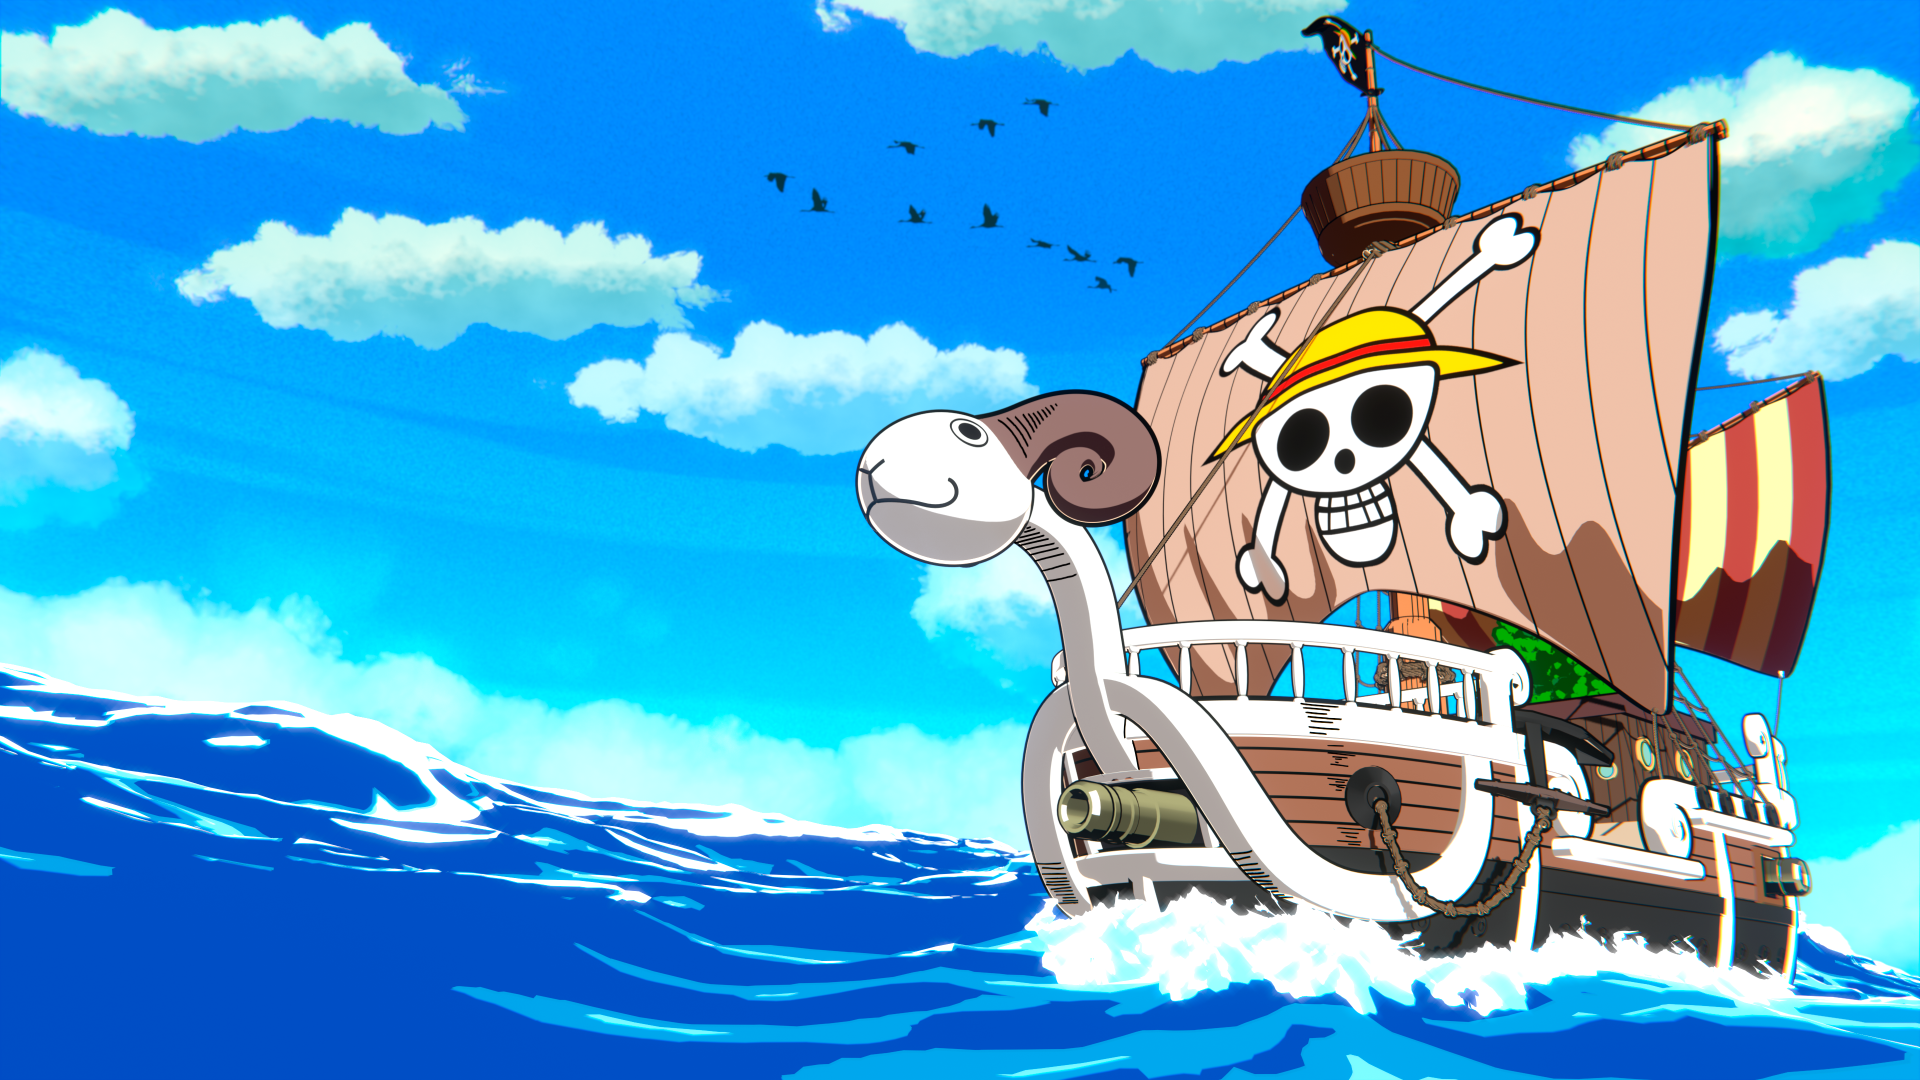 Going Merry; One Piece  One piece wallpaper iphone, One piece